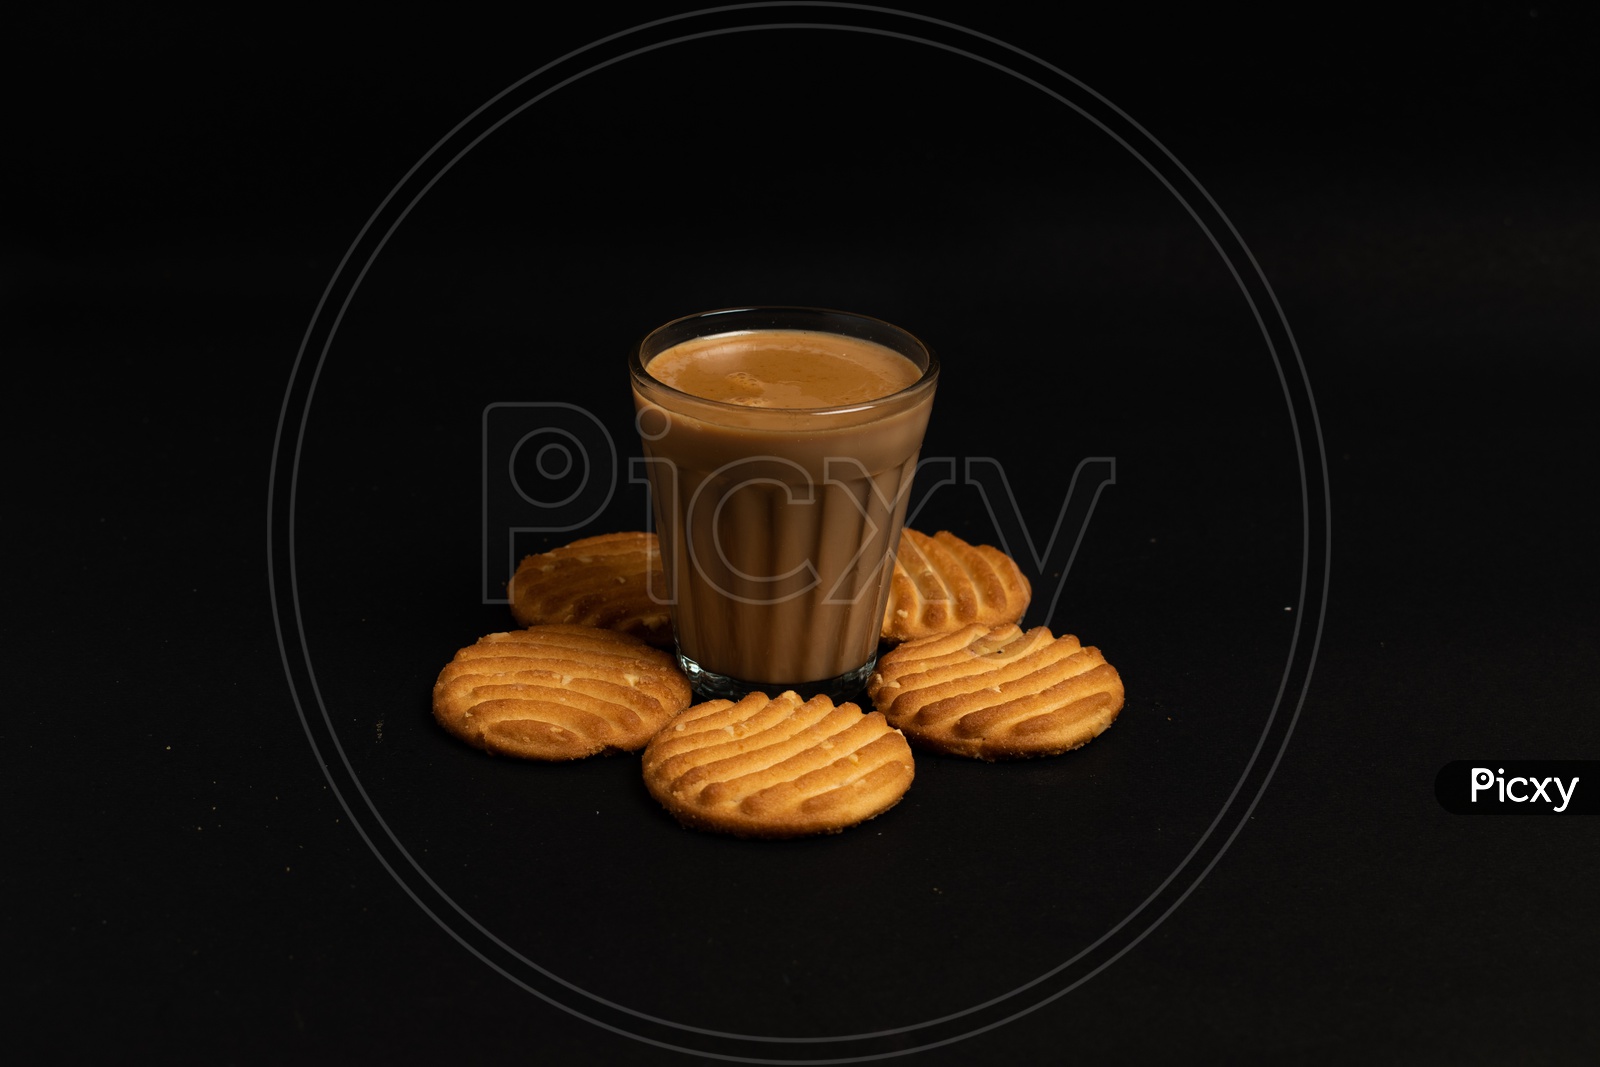 Aromatic beverage Tea/chai   with Good-day biscuits placed  on a black background.